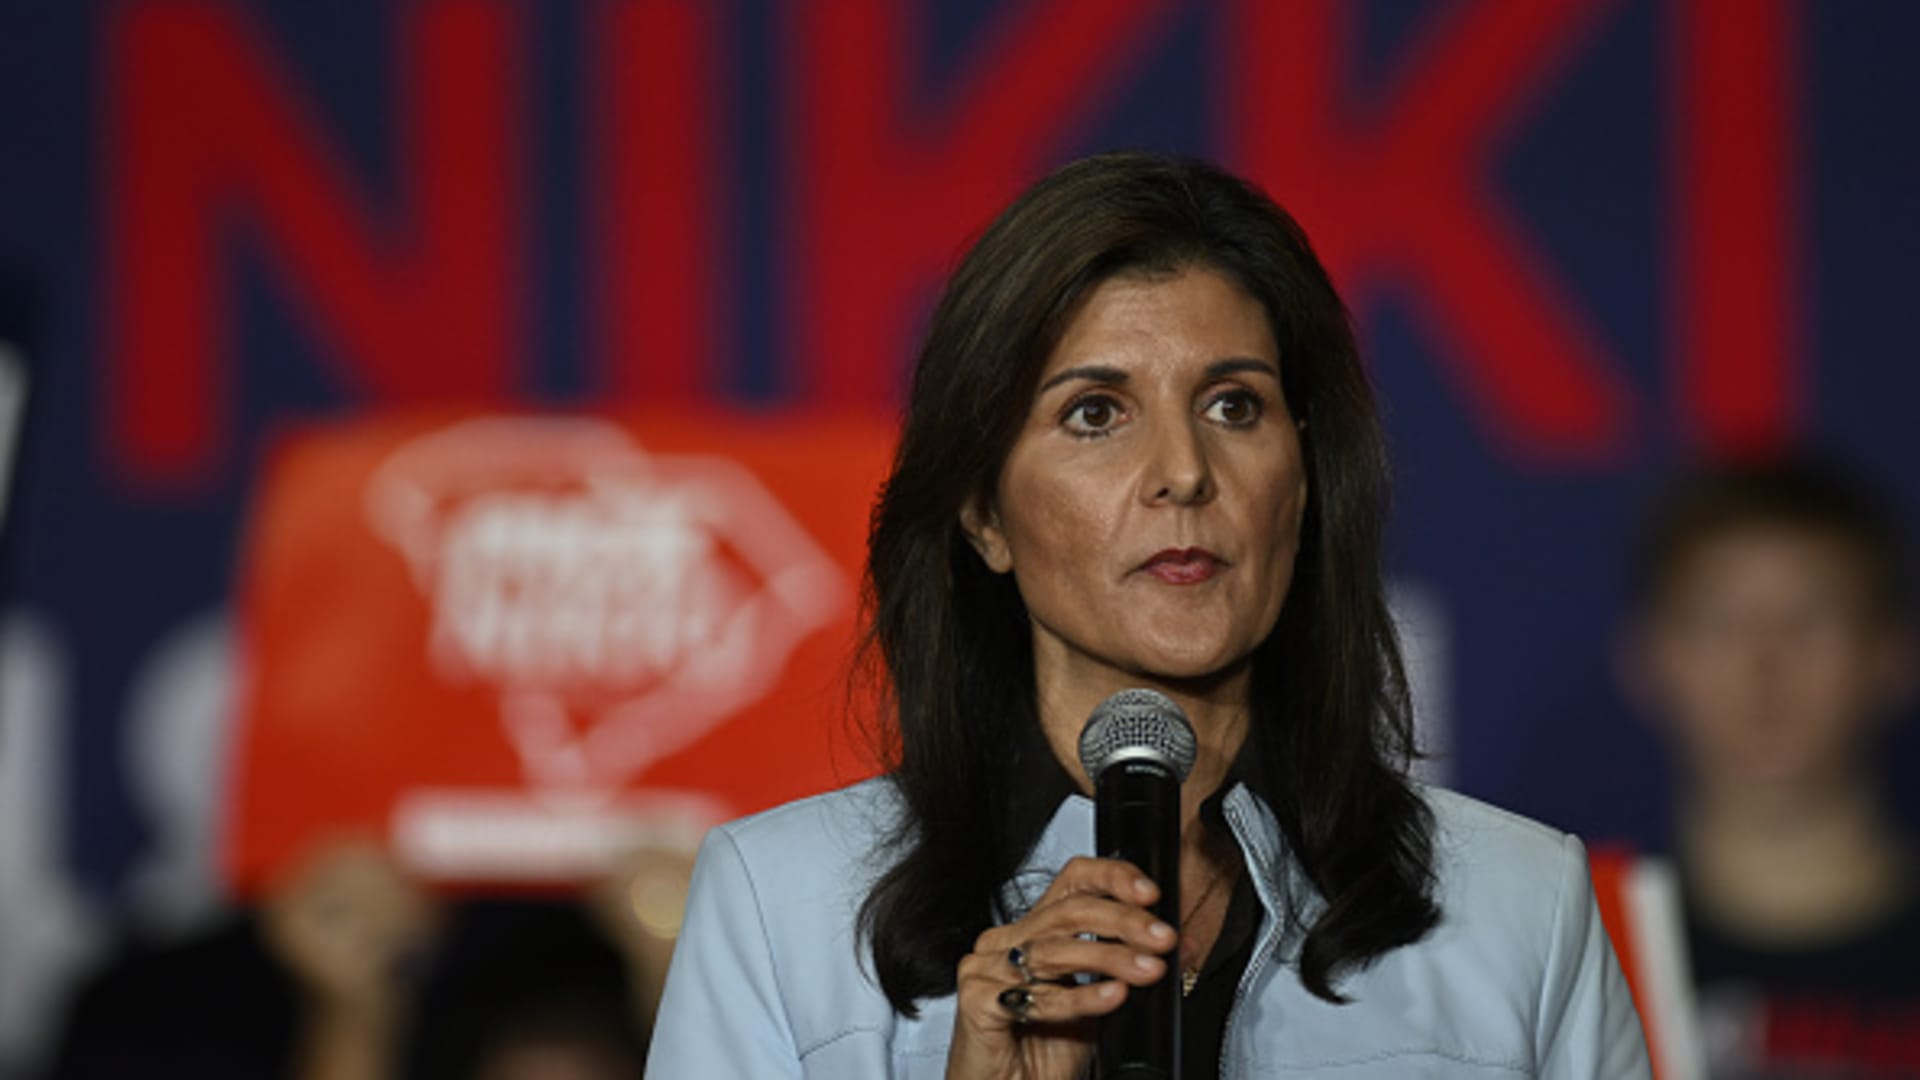 Nikki Haley requests Secret Service safety, citing rise in threats